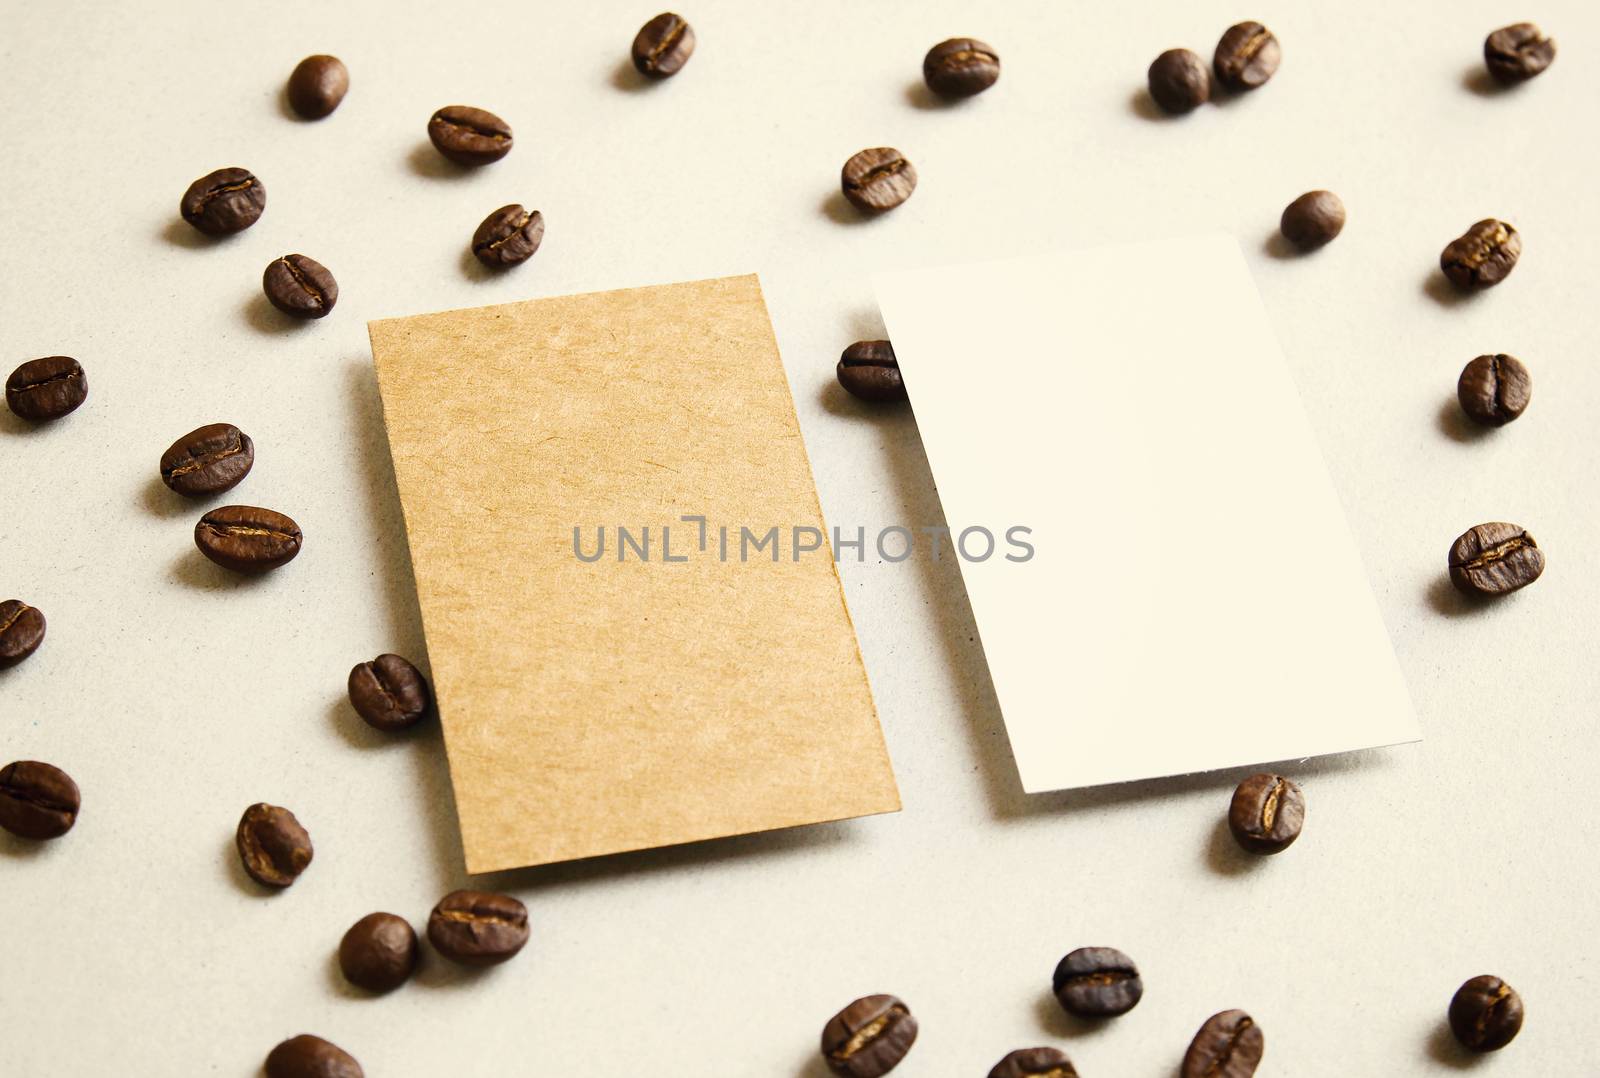 Blank business name card on coffee beans with retro filter effec by nuchylee